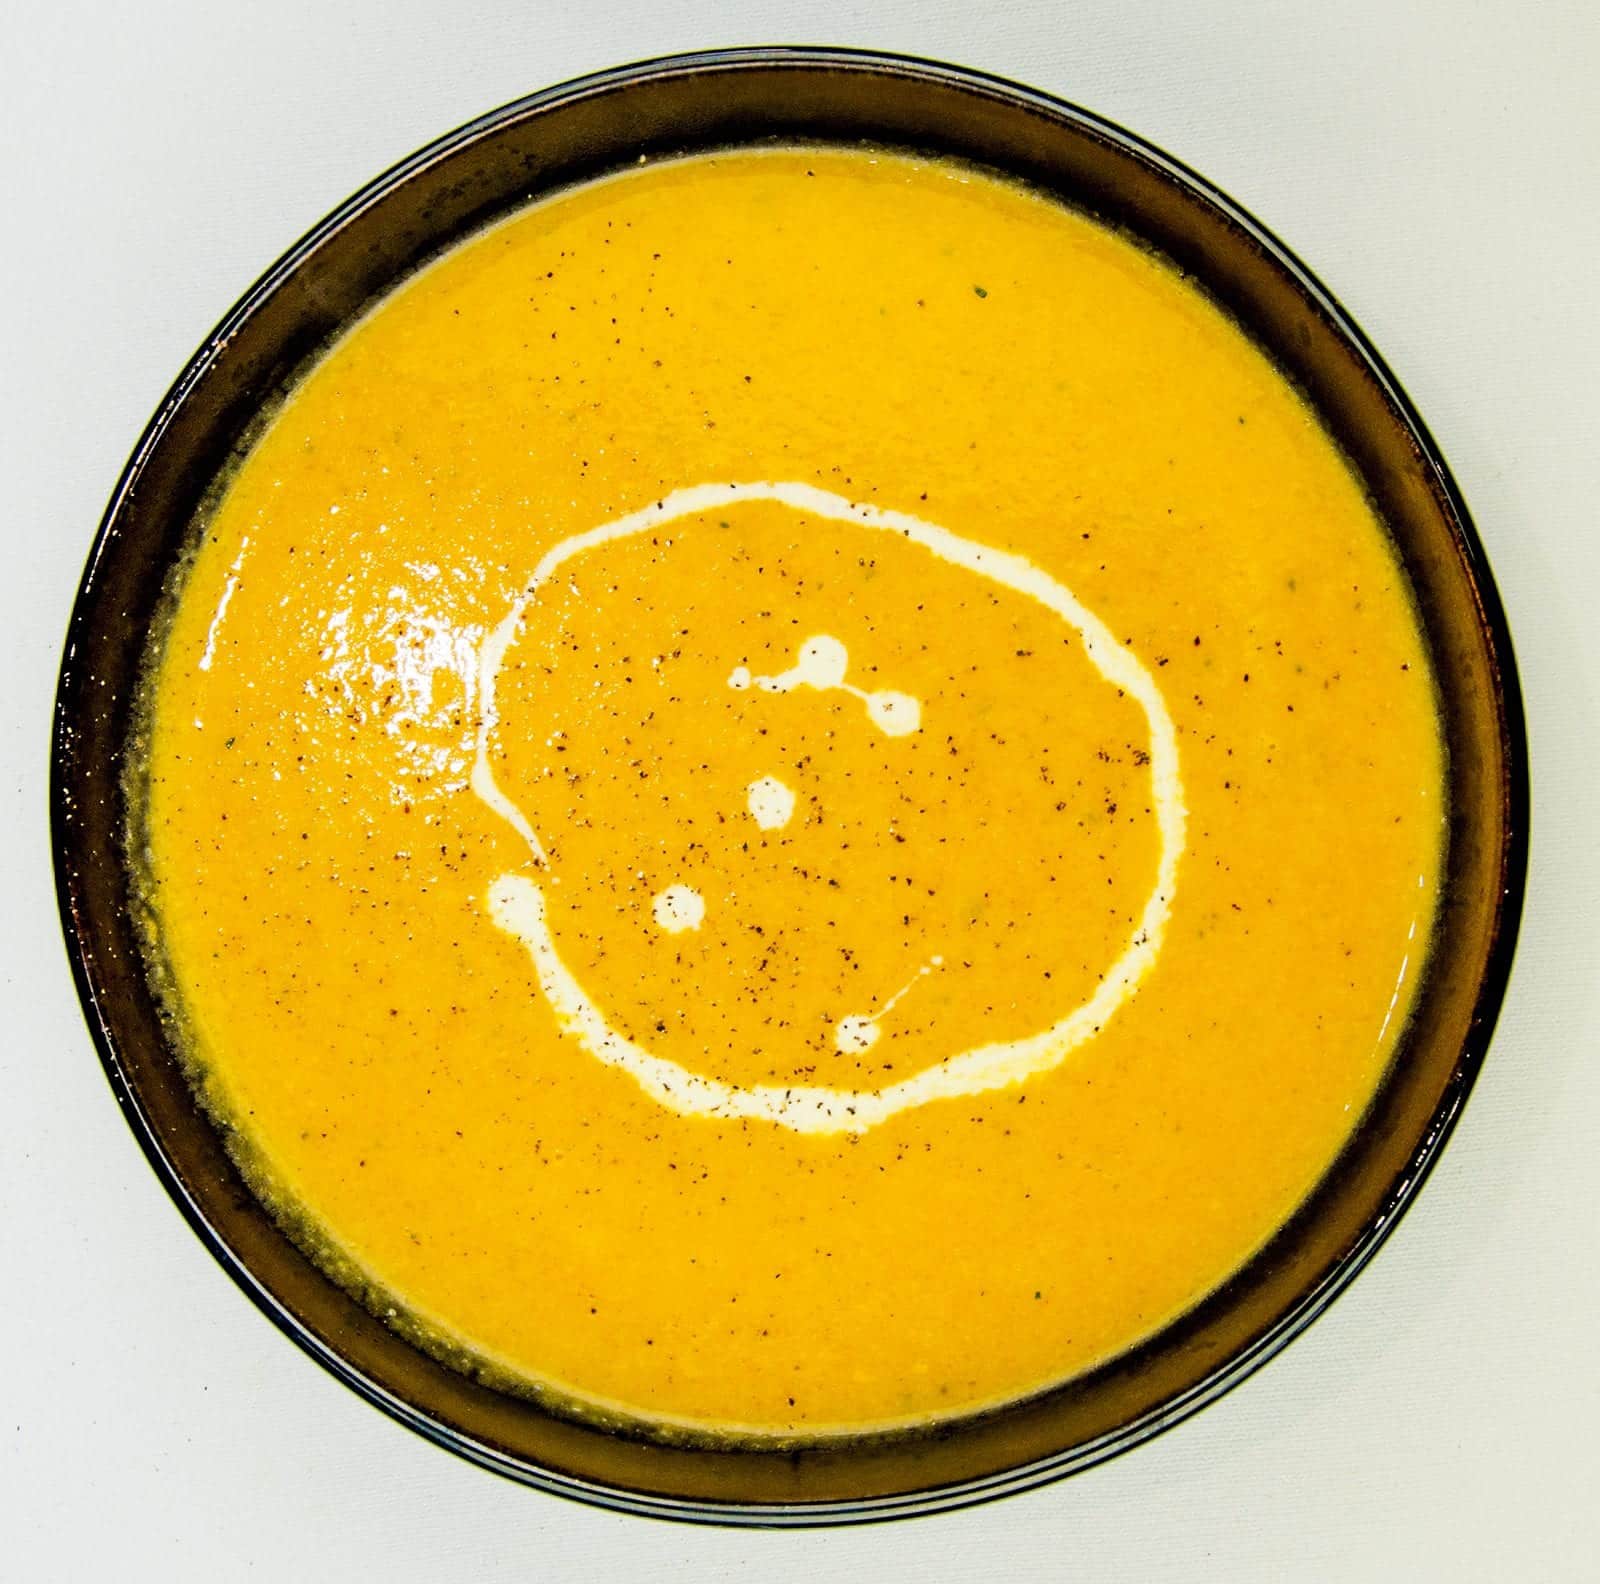 Butternut squash soup. Coming home from the cold? Want something to warm you up? The perfect winter warmer recipe. How to make butternut squash soup. Yum! | theyumyumclub.com